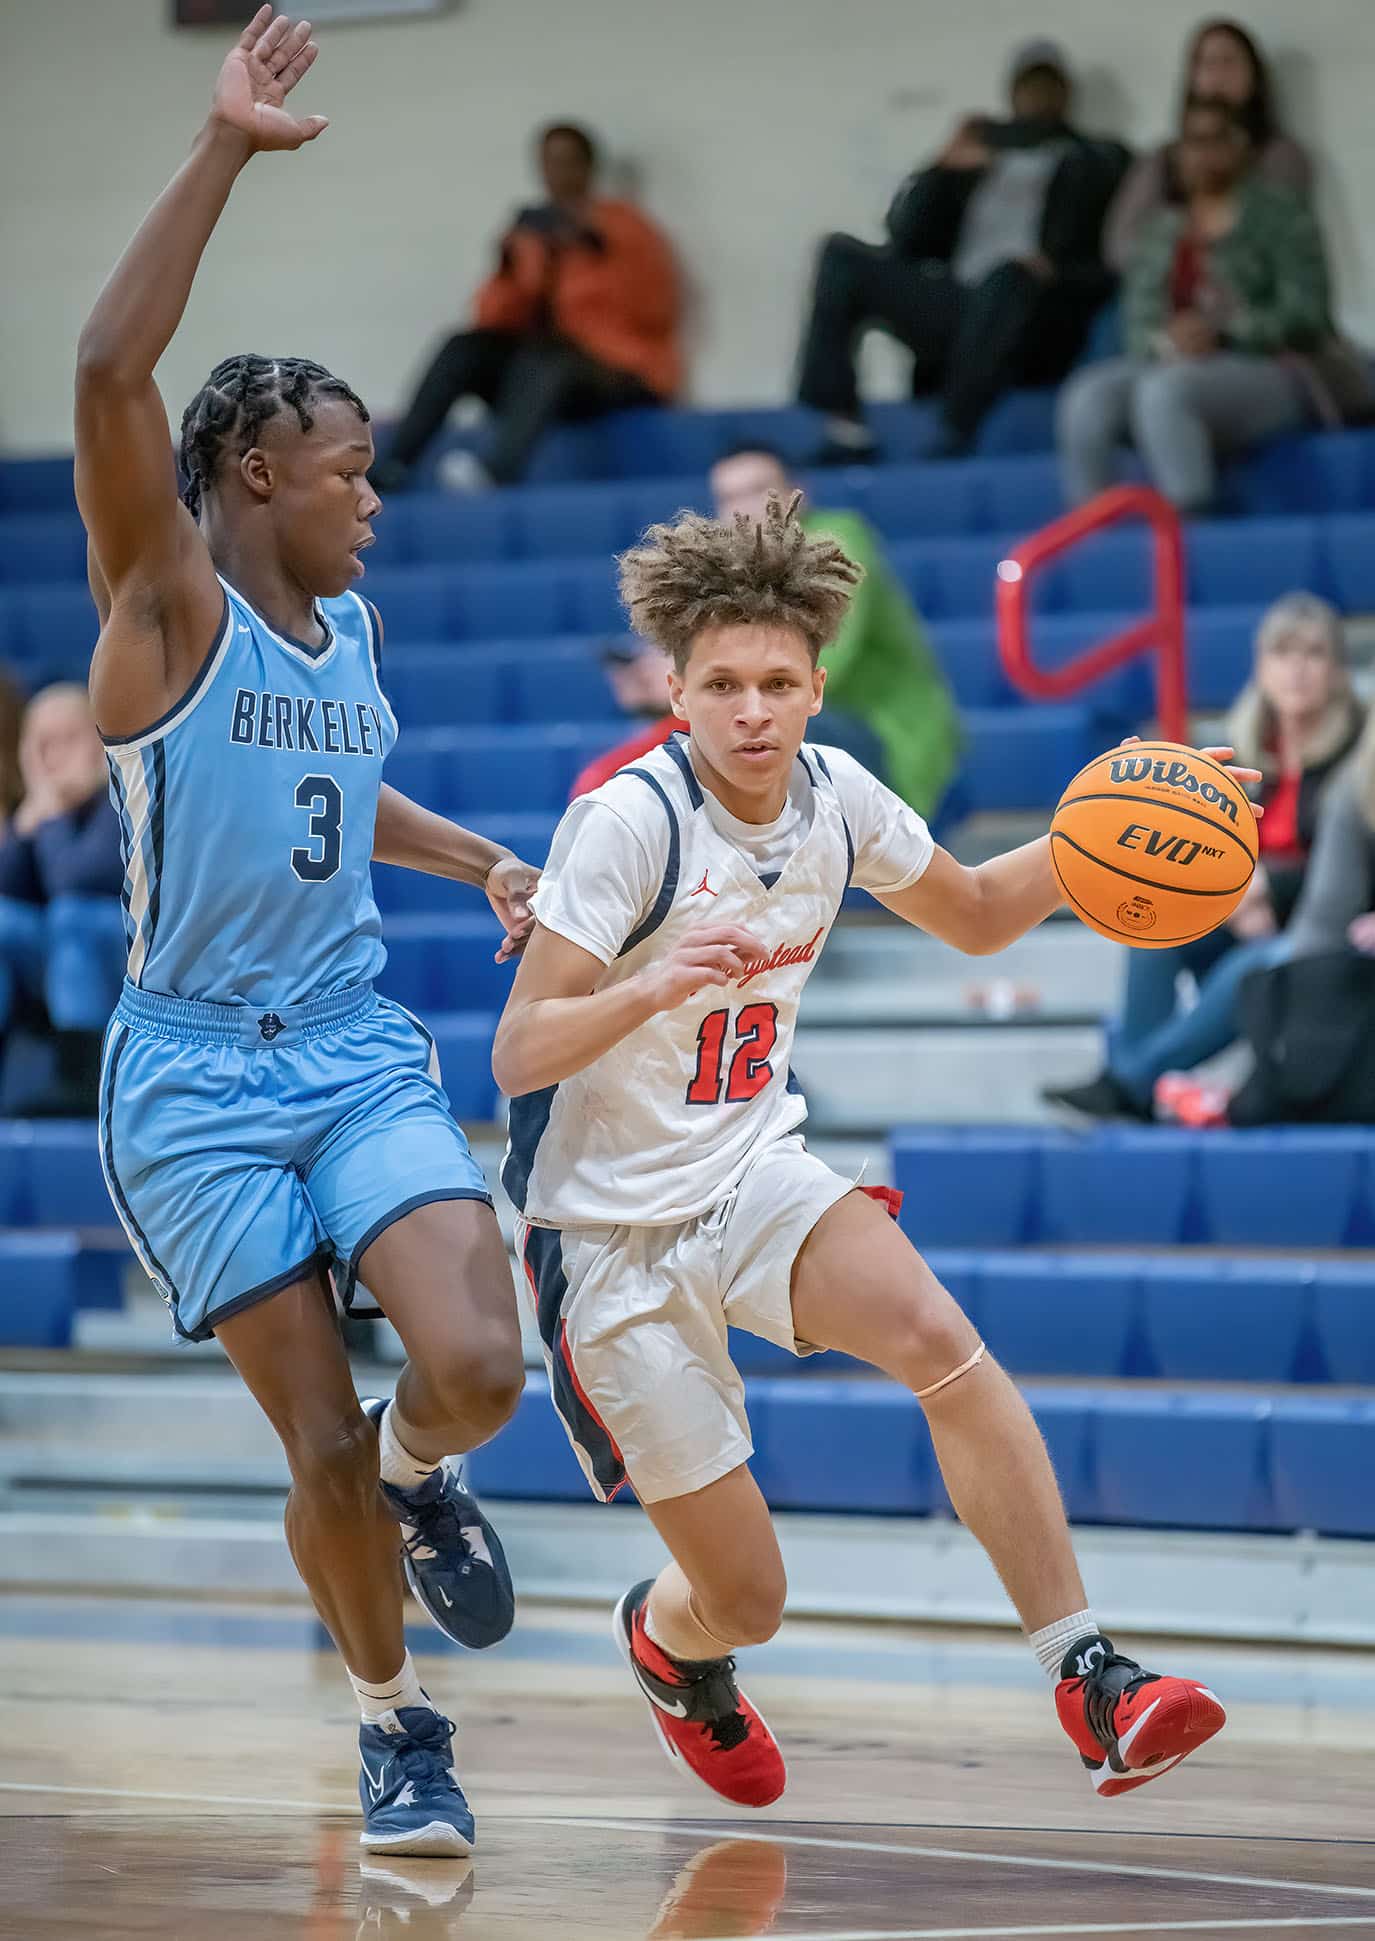 Springstead High,12, Austin Nicholson looks for a path to the basket while guarded by Berkely Prep ,3, George Kimble Wednesday in the 8th Annual Greg O’Connell Shootout at Springstead High. Photo by JOE DiCRISTOFALO